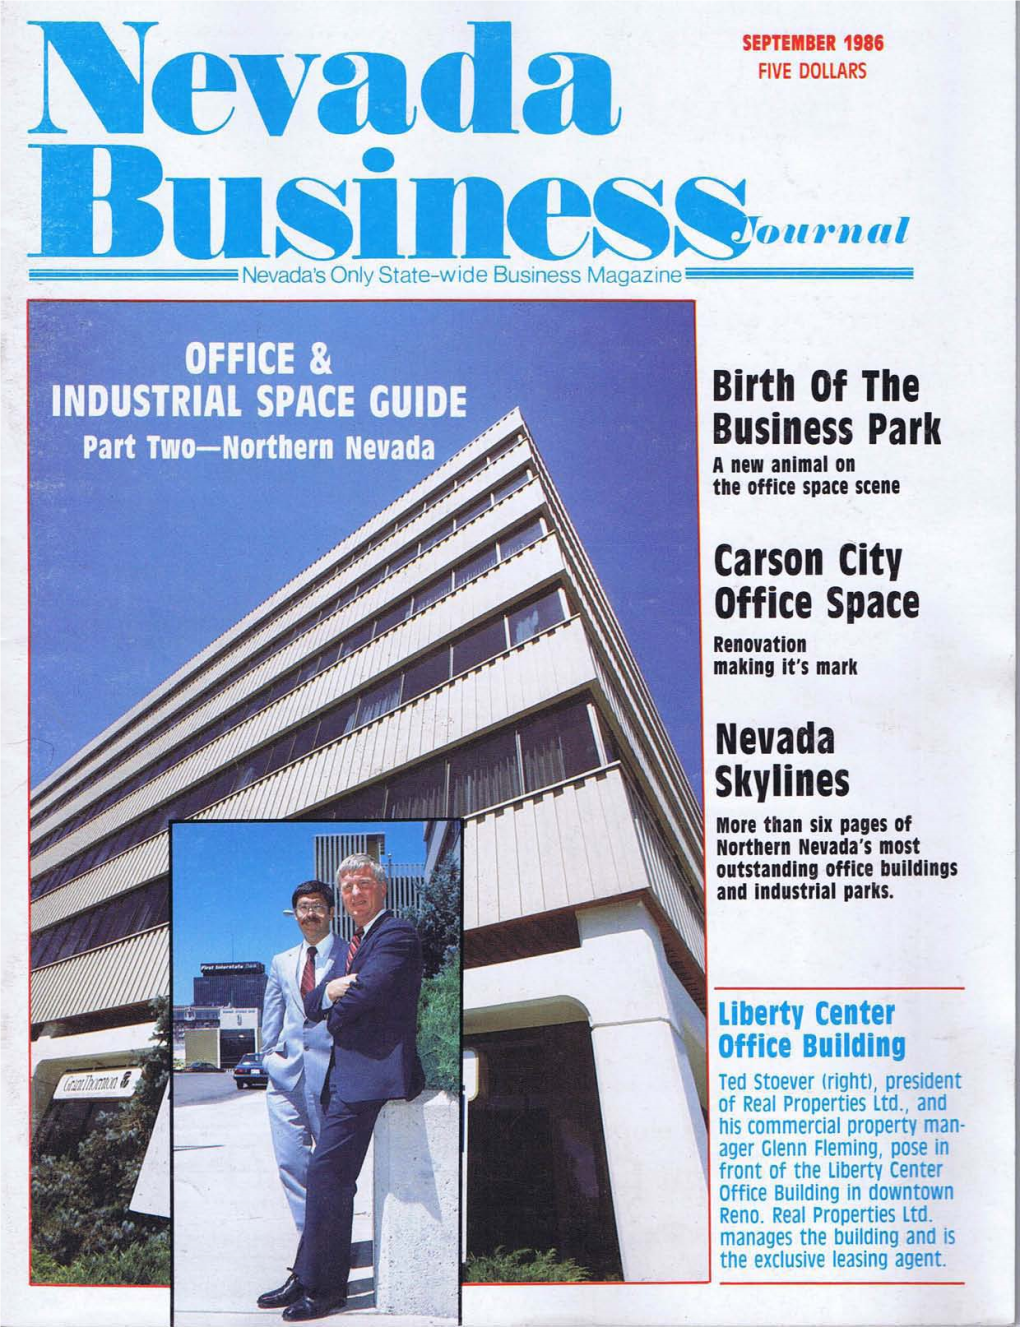 Usioessfj"""F1' -"""'''''''''''''''''''''''''''''..Nevada's Only State-Wide Business Magazine